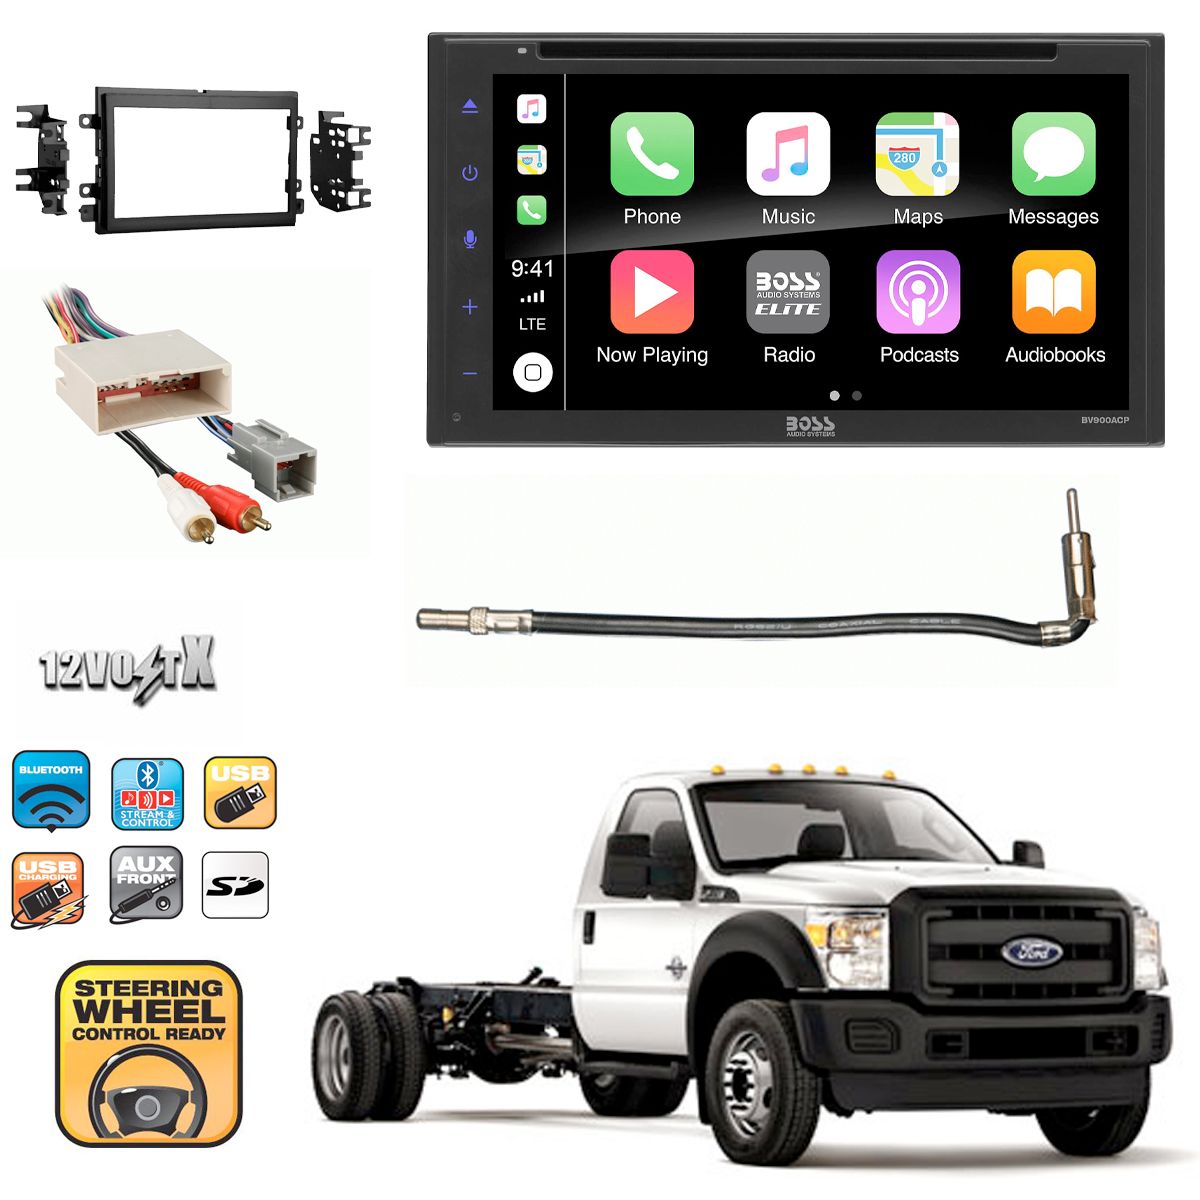 6.75" Multimeda Cd/Dvd Receiver ,CarPlay, Android Auto For Ford F-550 2005-12